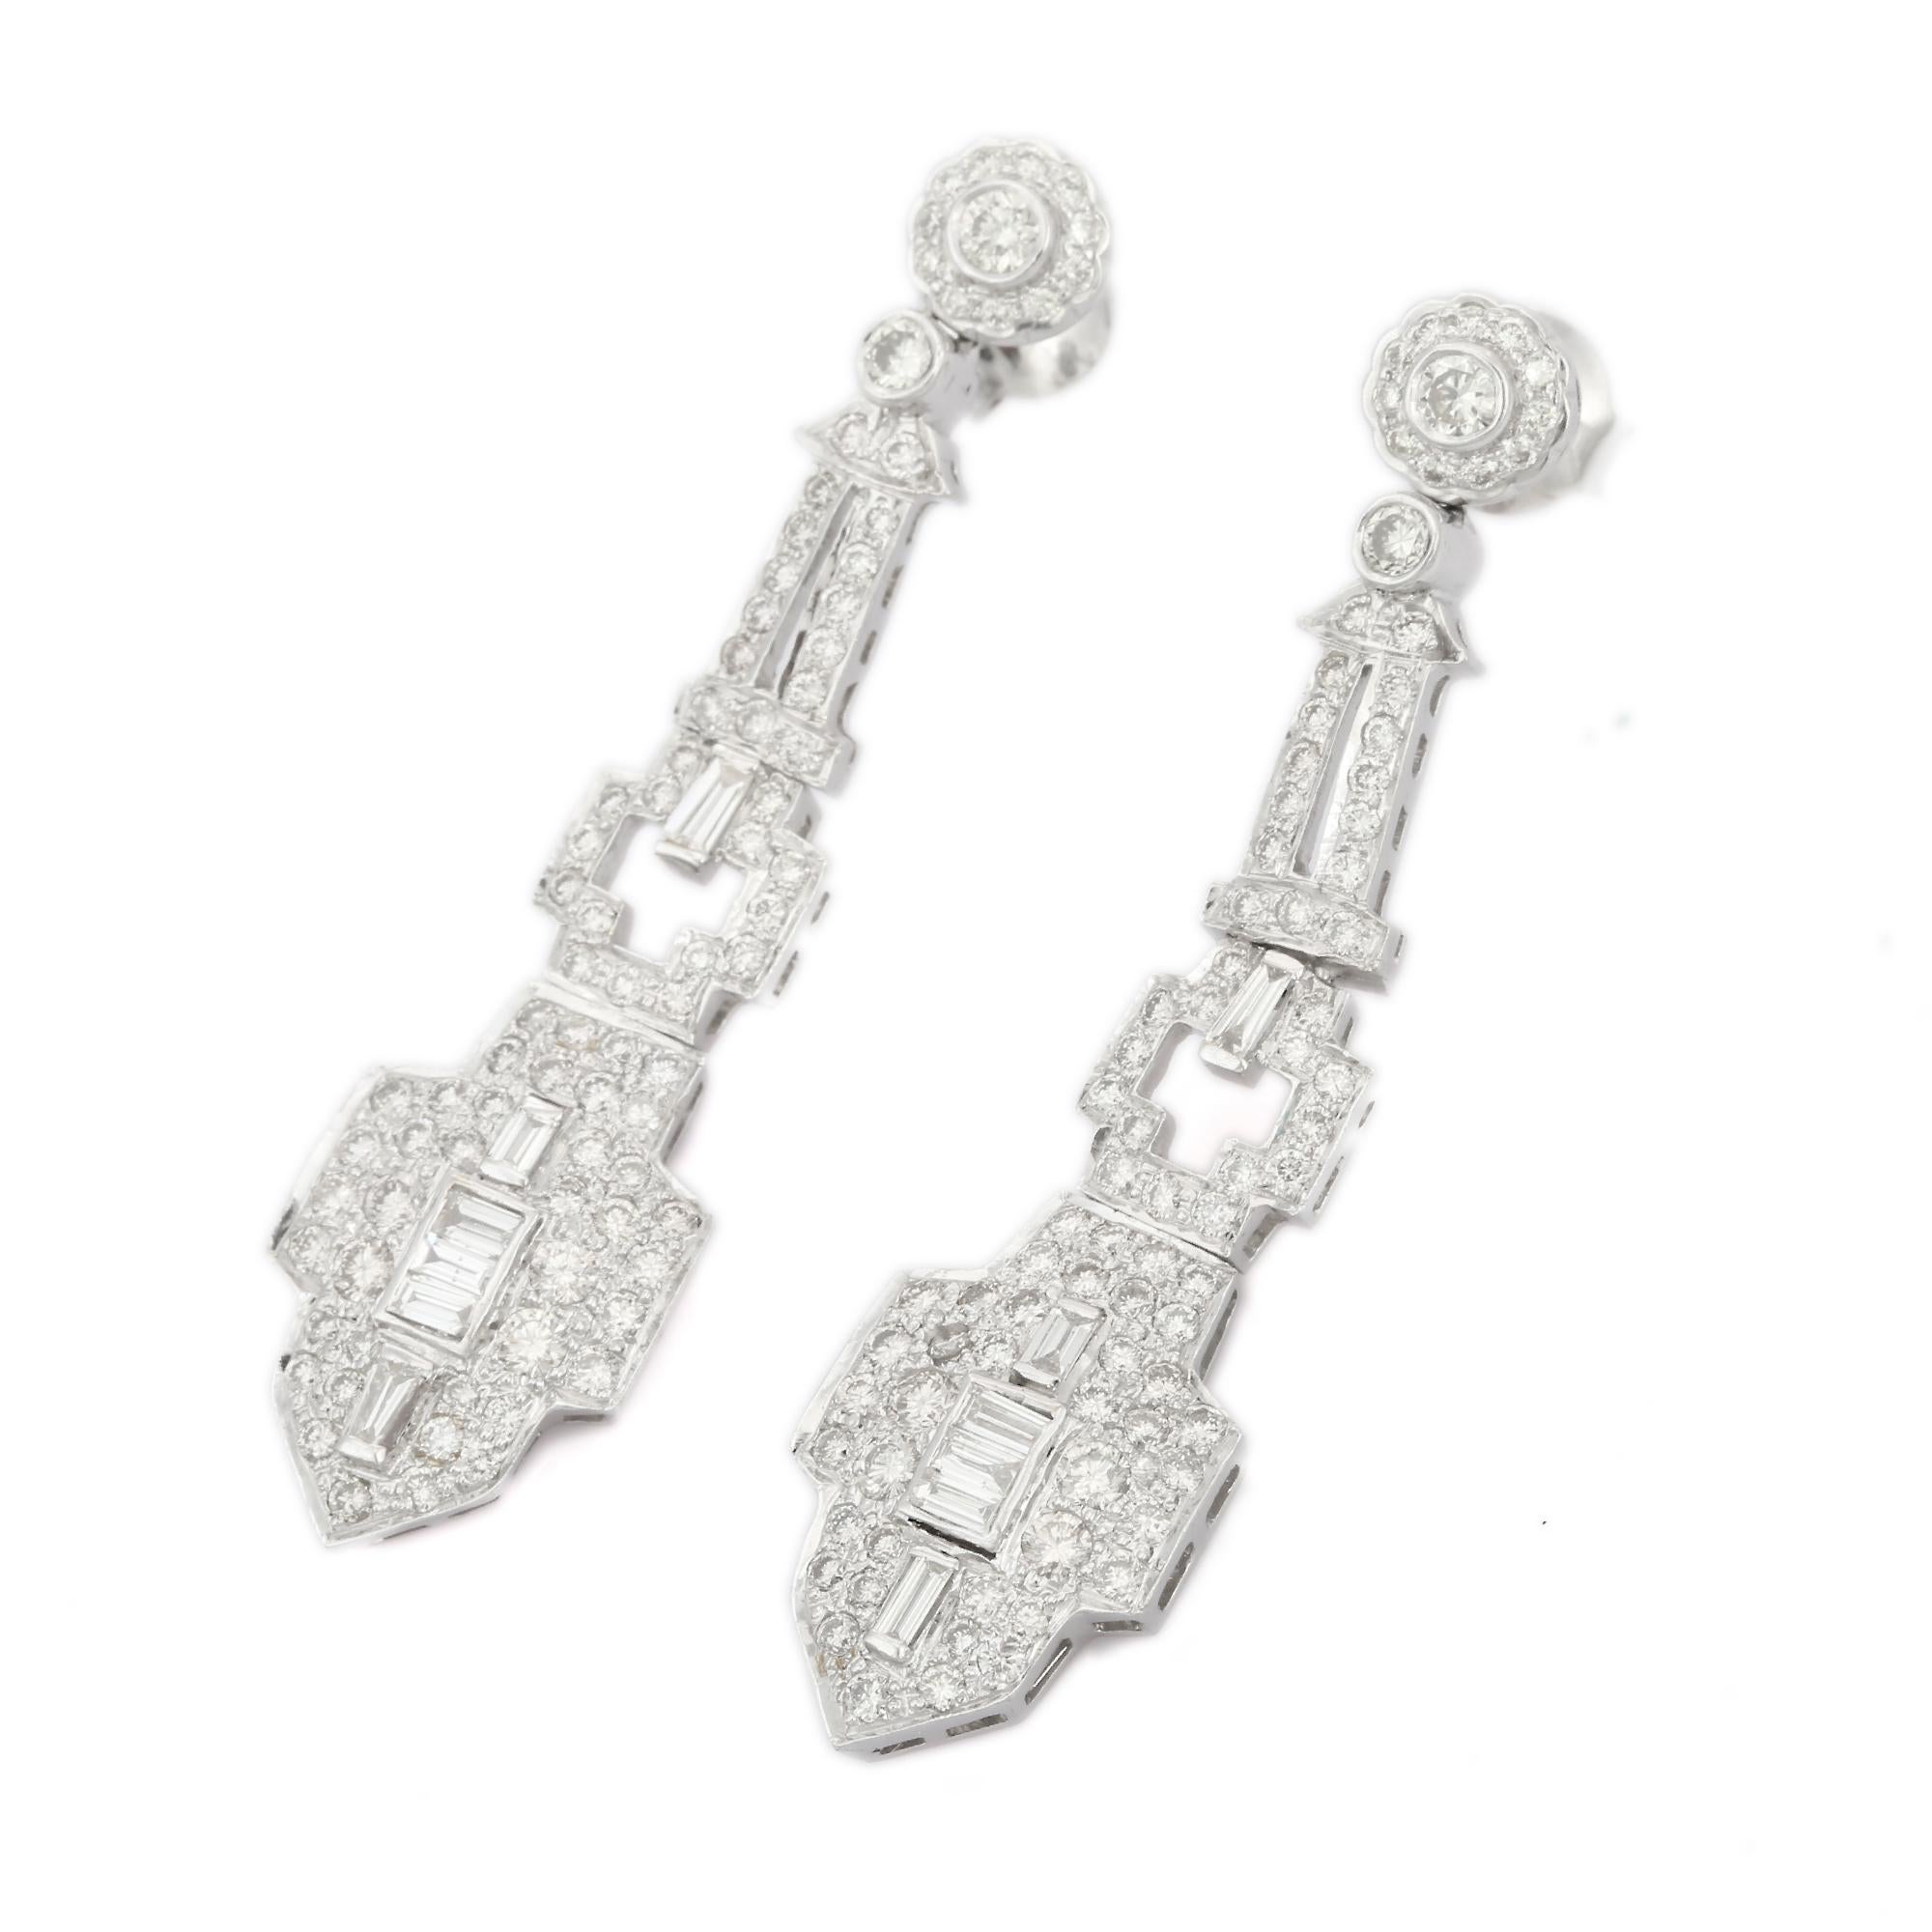 Exquisite Art Deco Diamond Dangle Earrings in 18K Gold to make a statement with your look. You shall need dangle earrings to make a statement with your look. These earrings create a sparkling, luxurious look featuring round cut diamond.
April